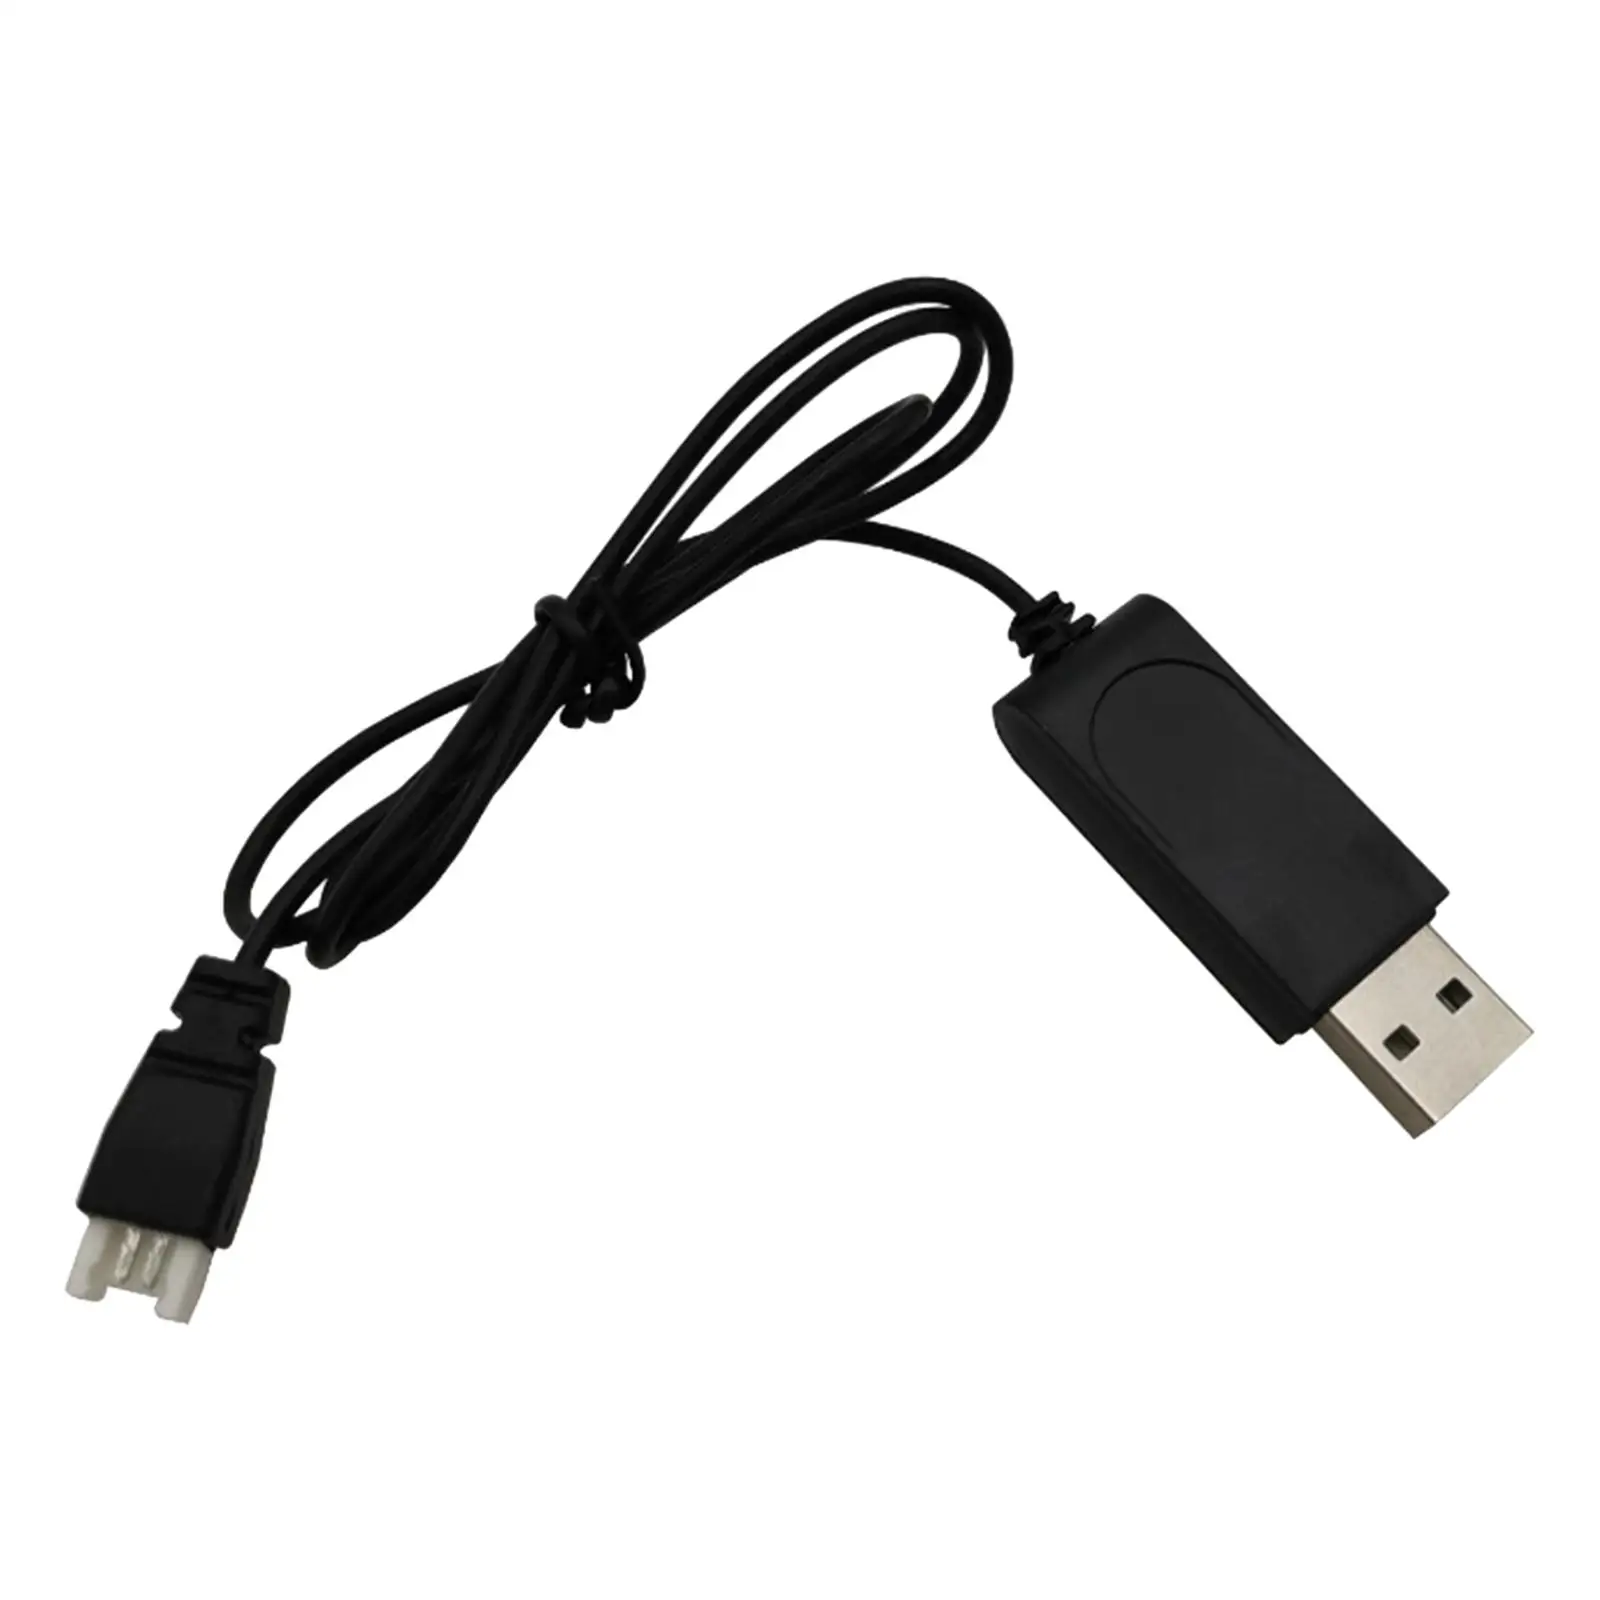 USB Battery Charging Cable 3.7V Replaces Length 58cm with Indicator Light Durable USB Charging Cable Cord RC Drone Accessories